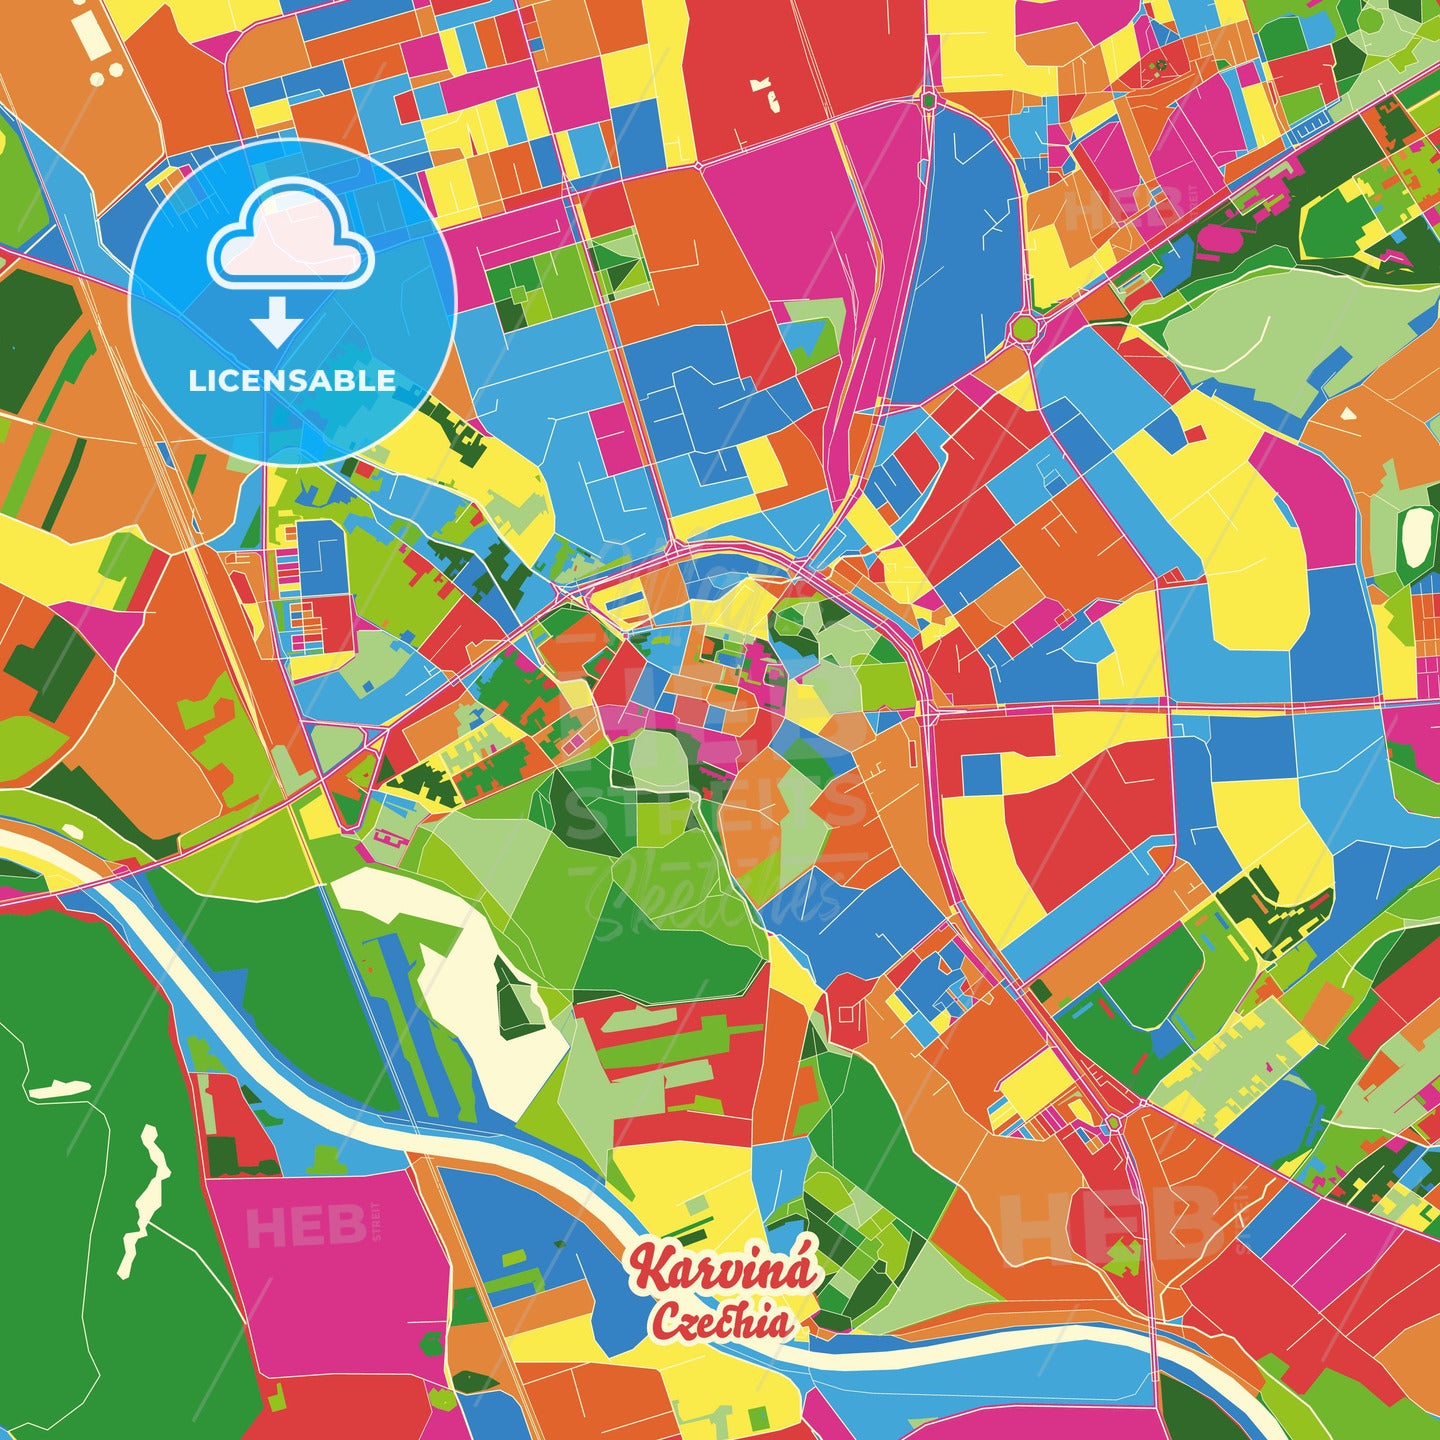 Karviná, Czechia Crazy Colorful Street Map Poster Template - HEBSTREITS Sketches